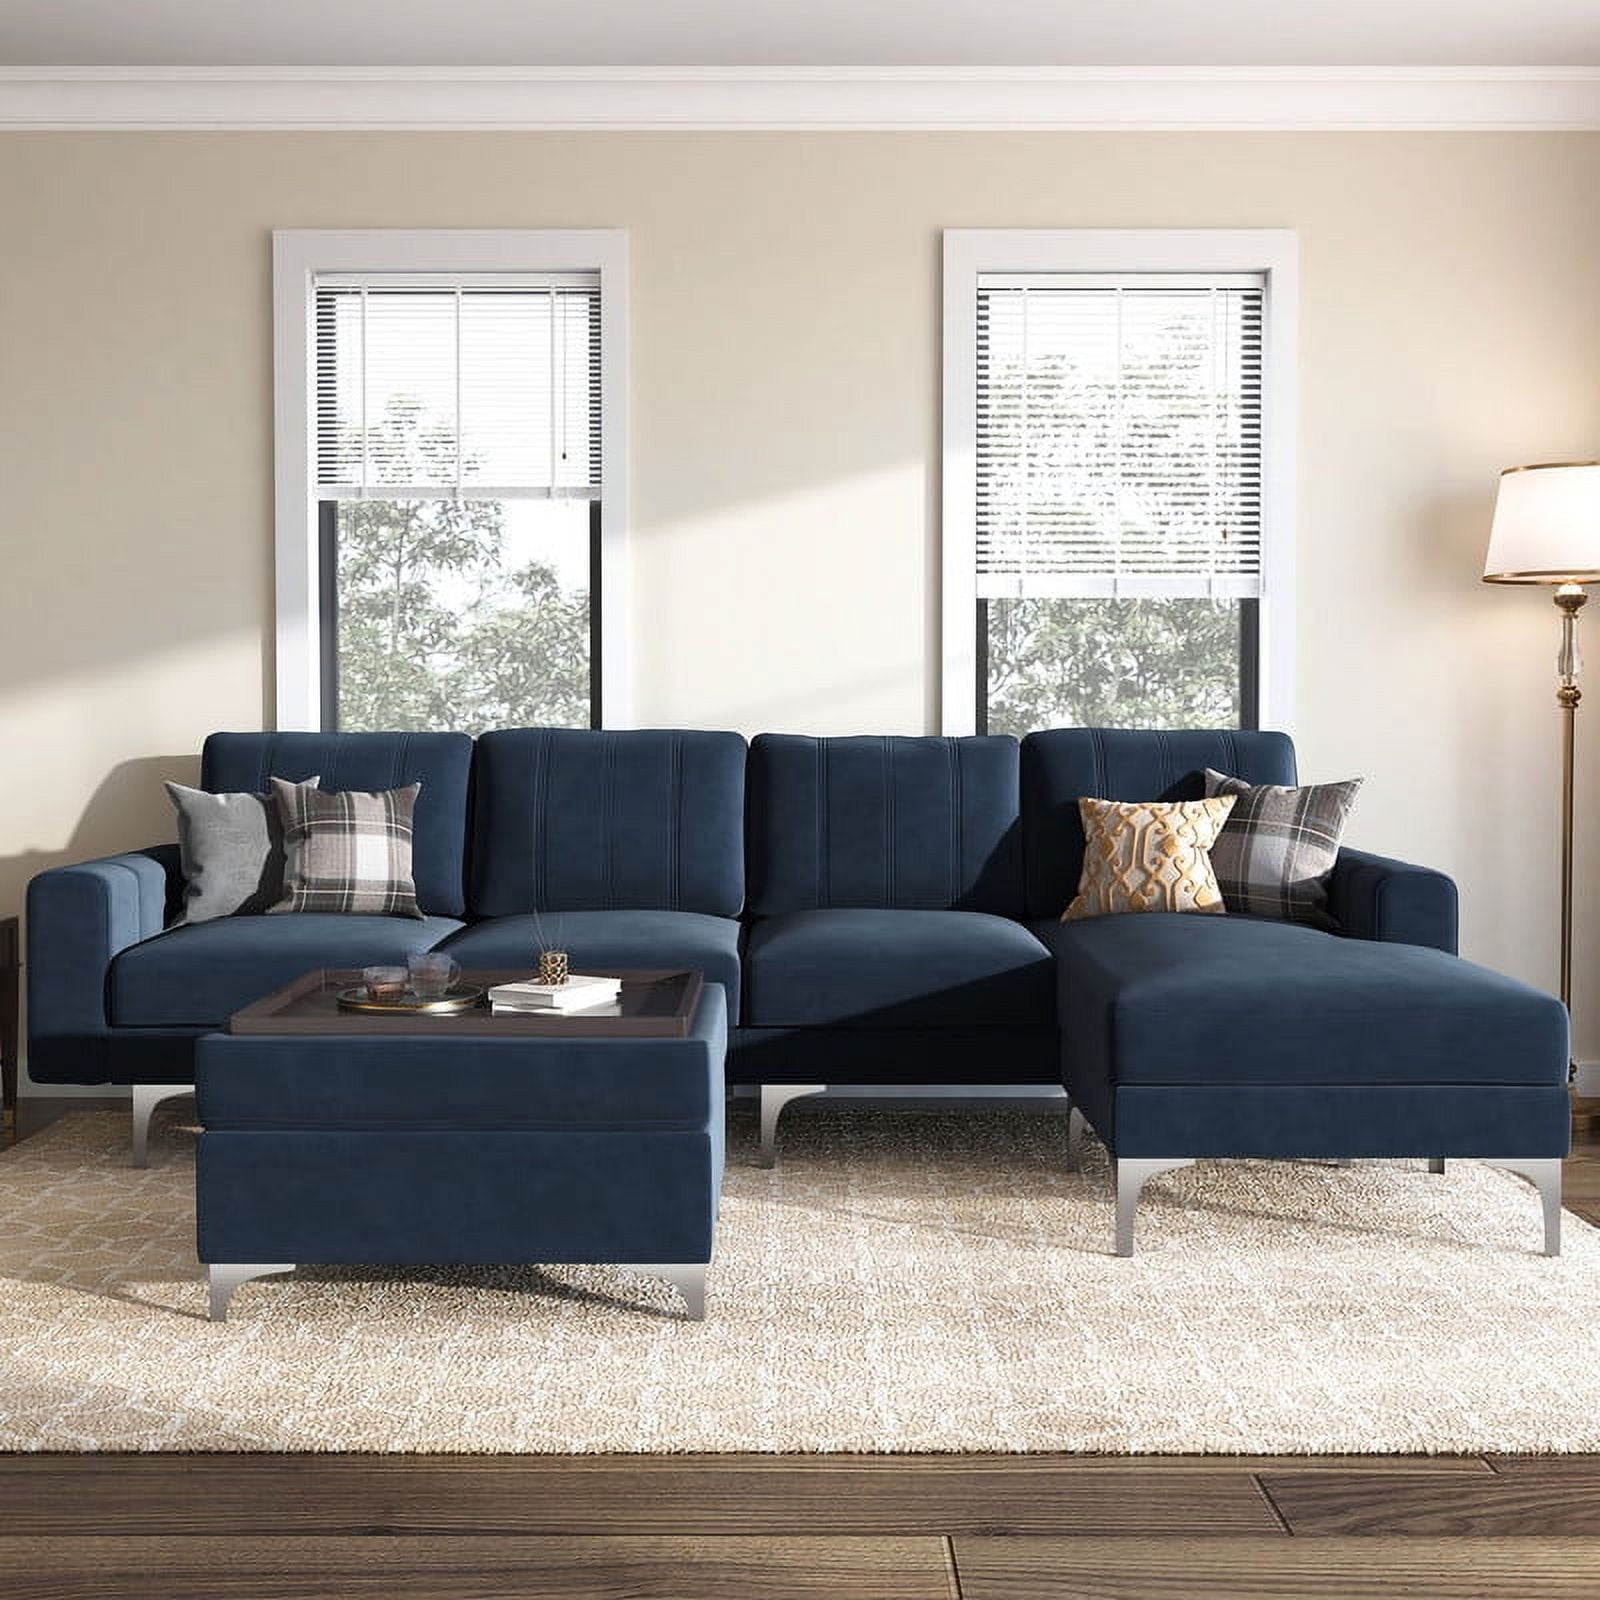 Honbay 4-Seat L-Shaped Sectional Sofa with Storage Ottoman Set